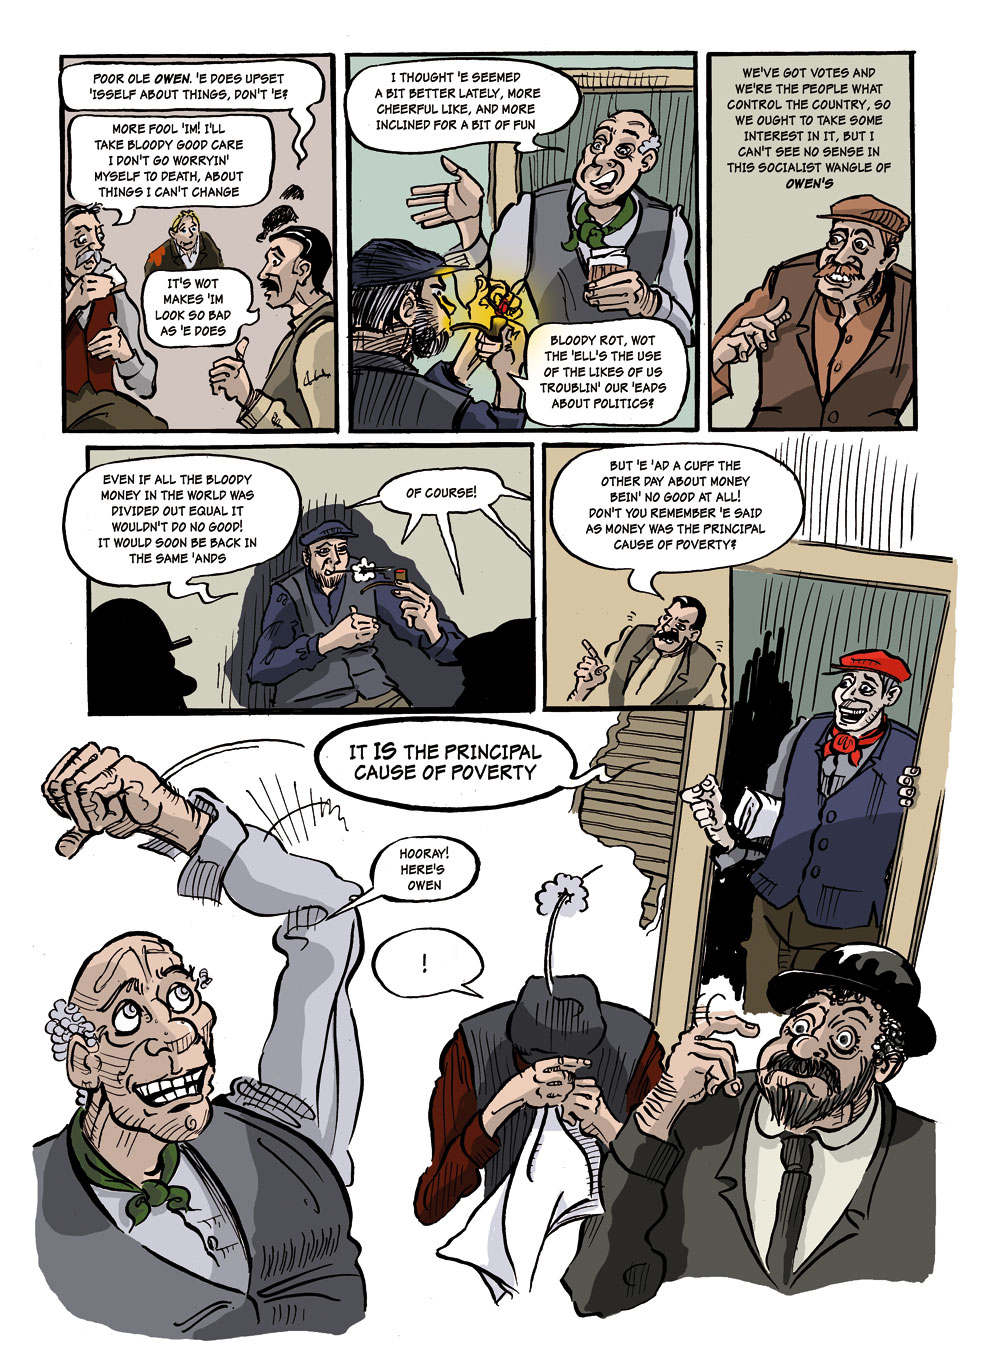 The Great Money Trick -- the comic from the The Ragged Trousered ...